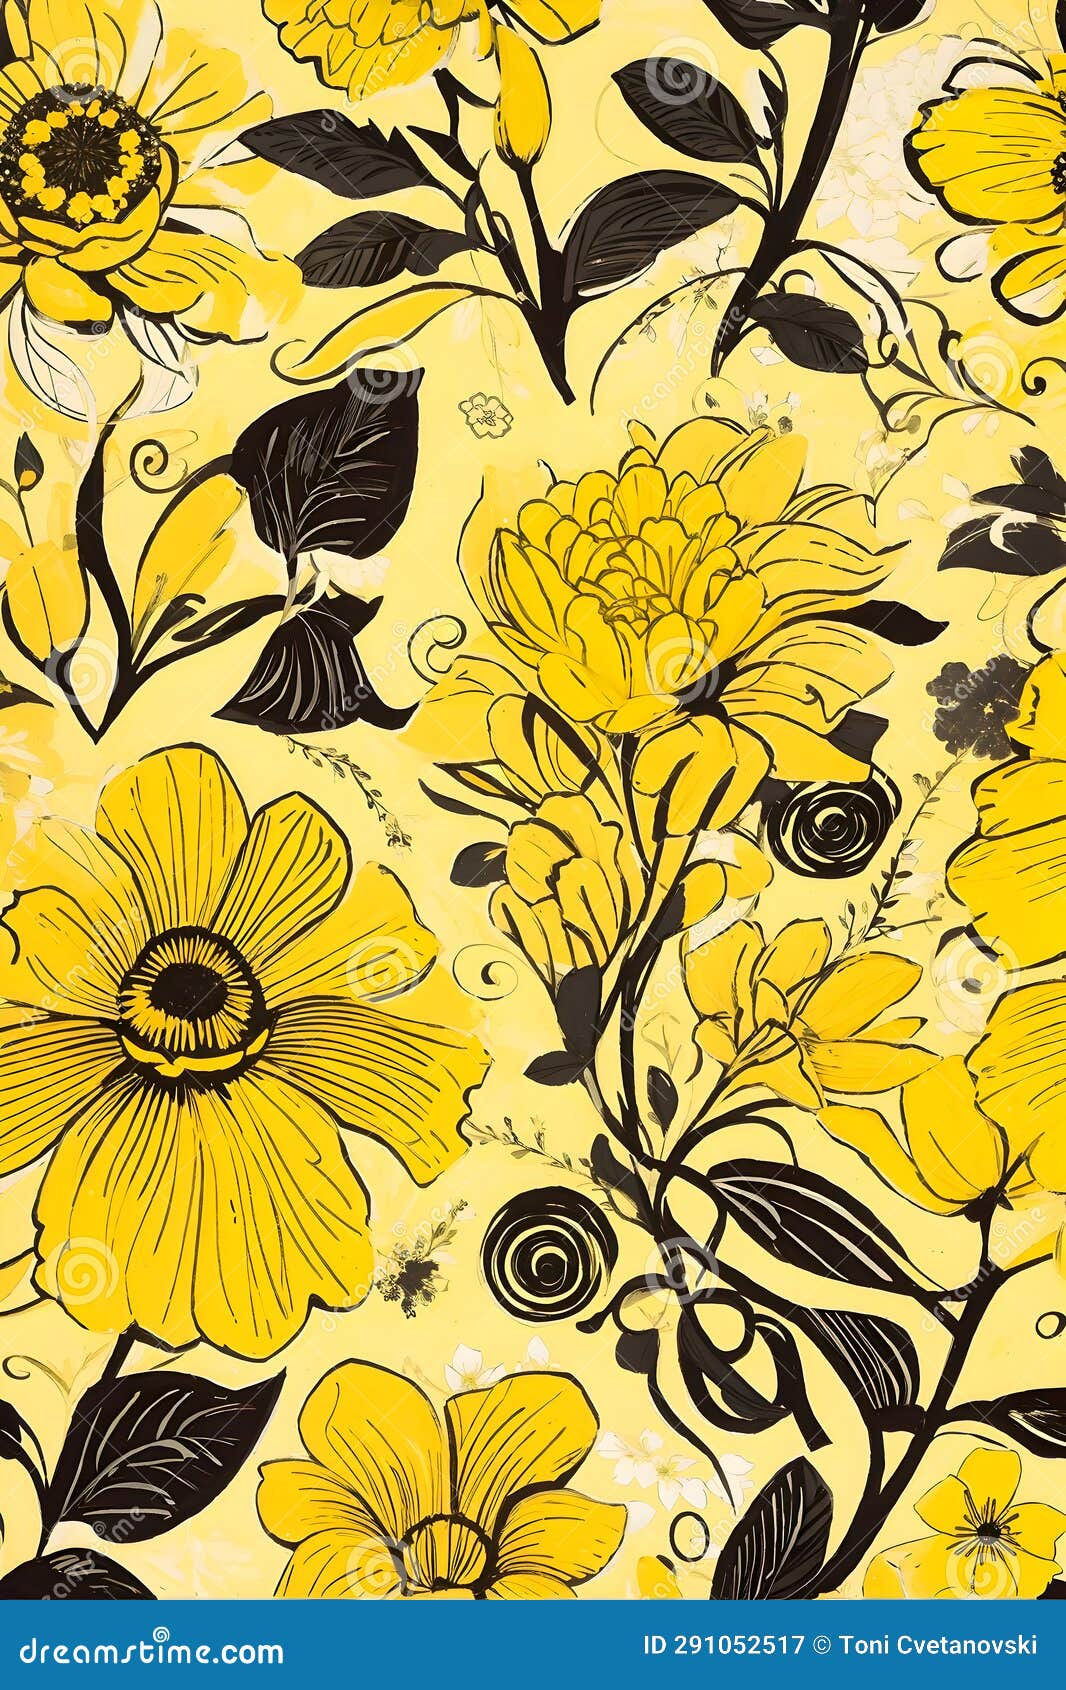 Seamless Floral Pattern with Yellow Flowers on a Grunge Background ...